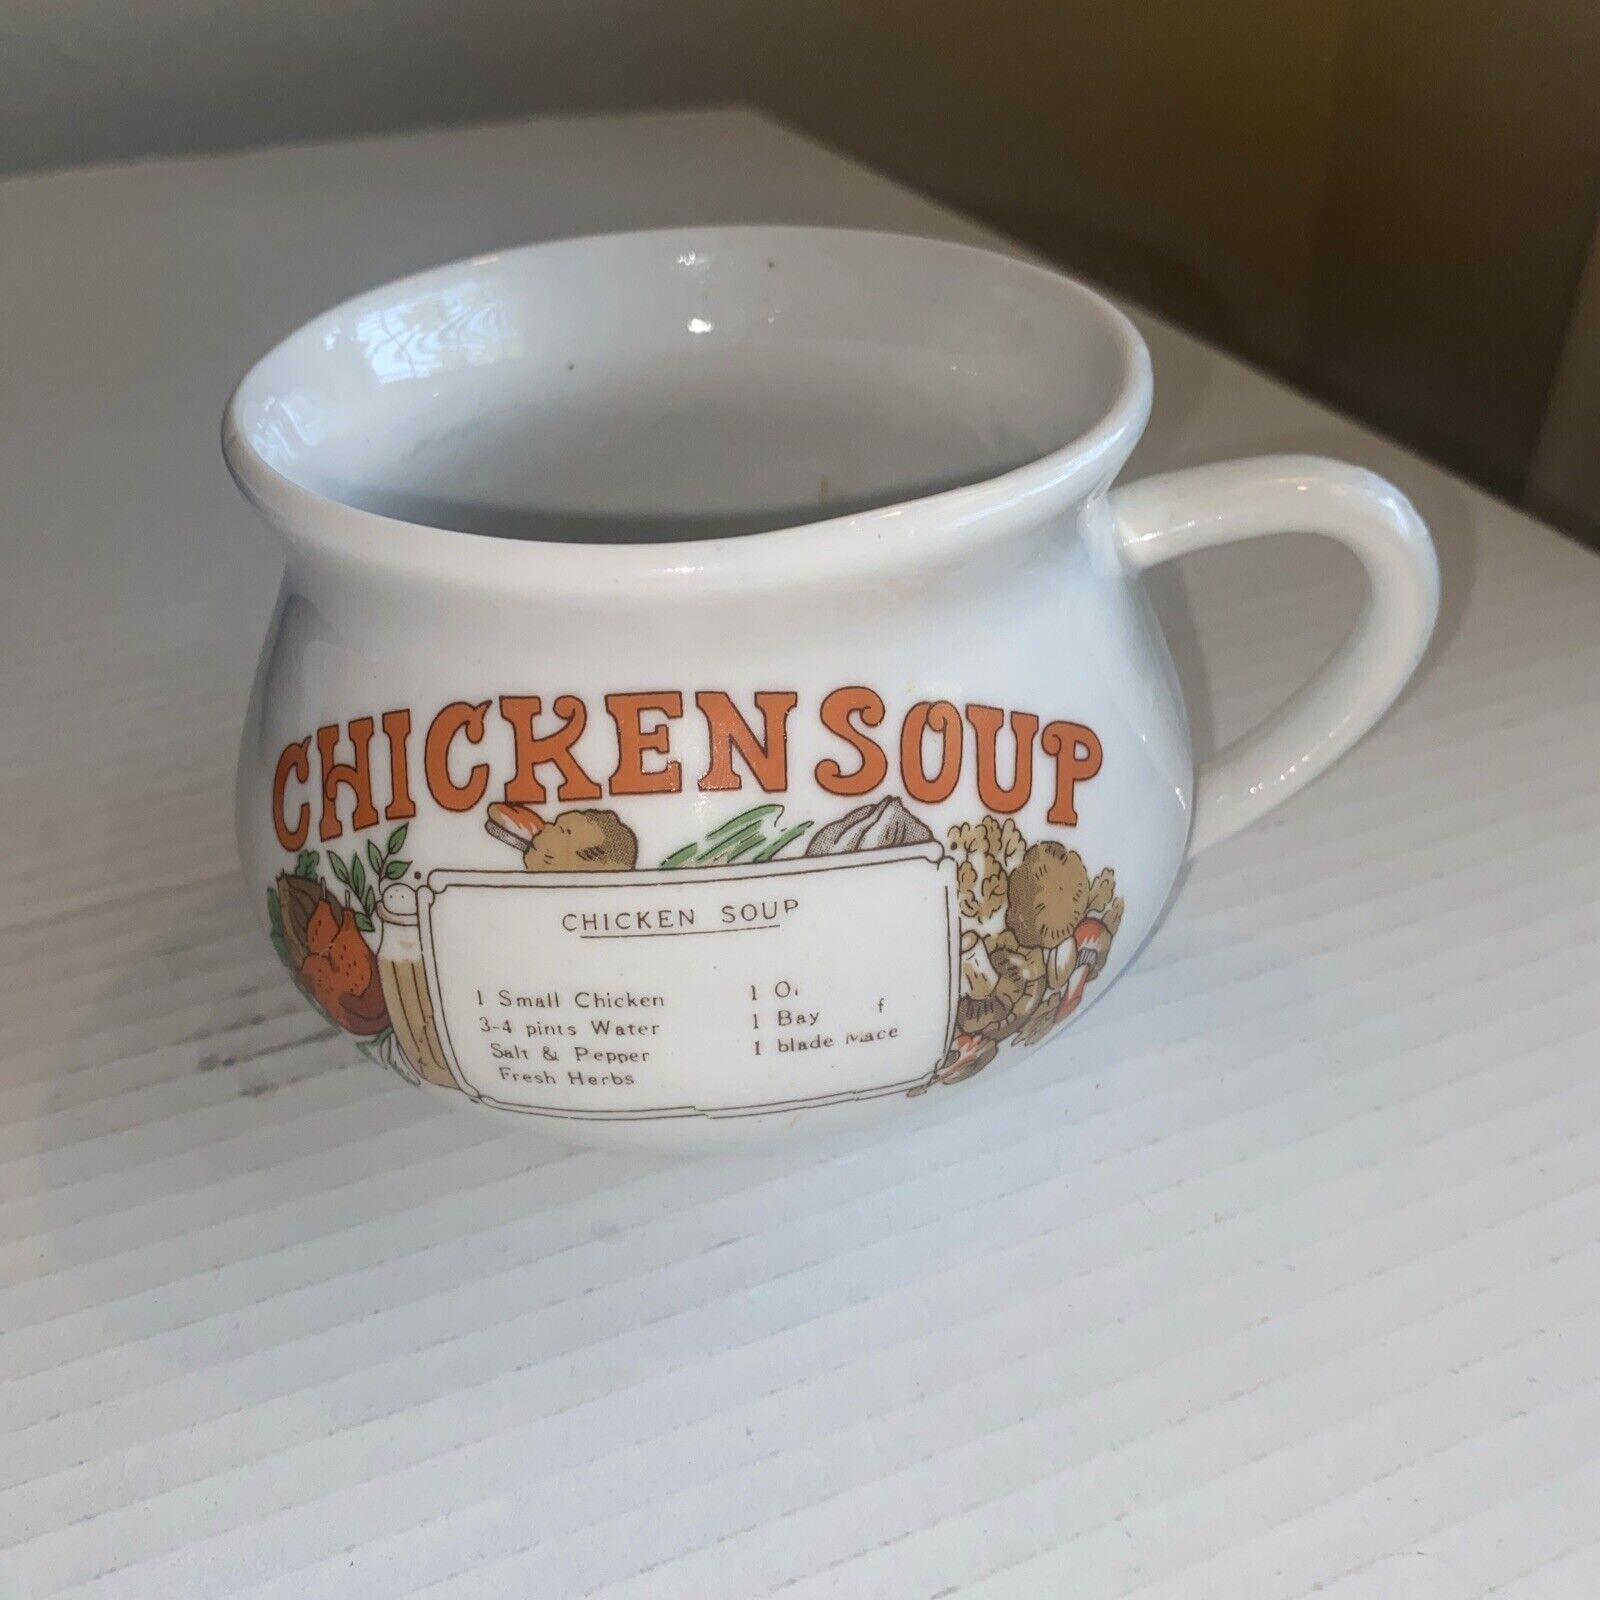 Chicken Soup Mug  Do It Recipe Vintage Ceramic Mug Cup With Recipe On Front